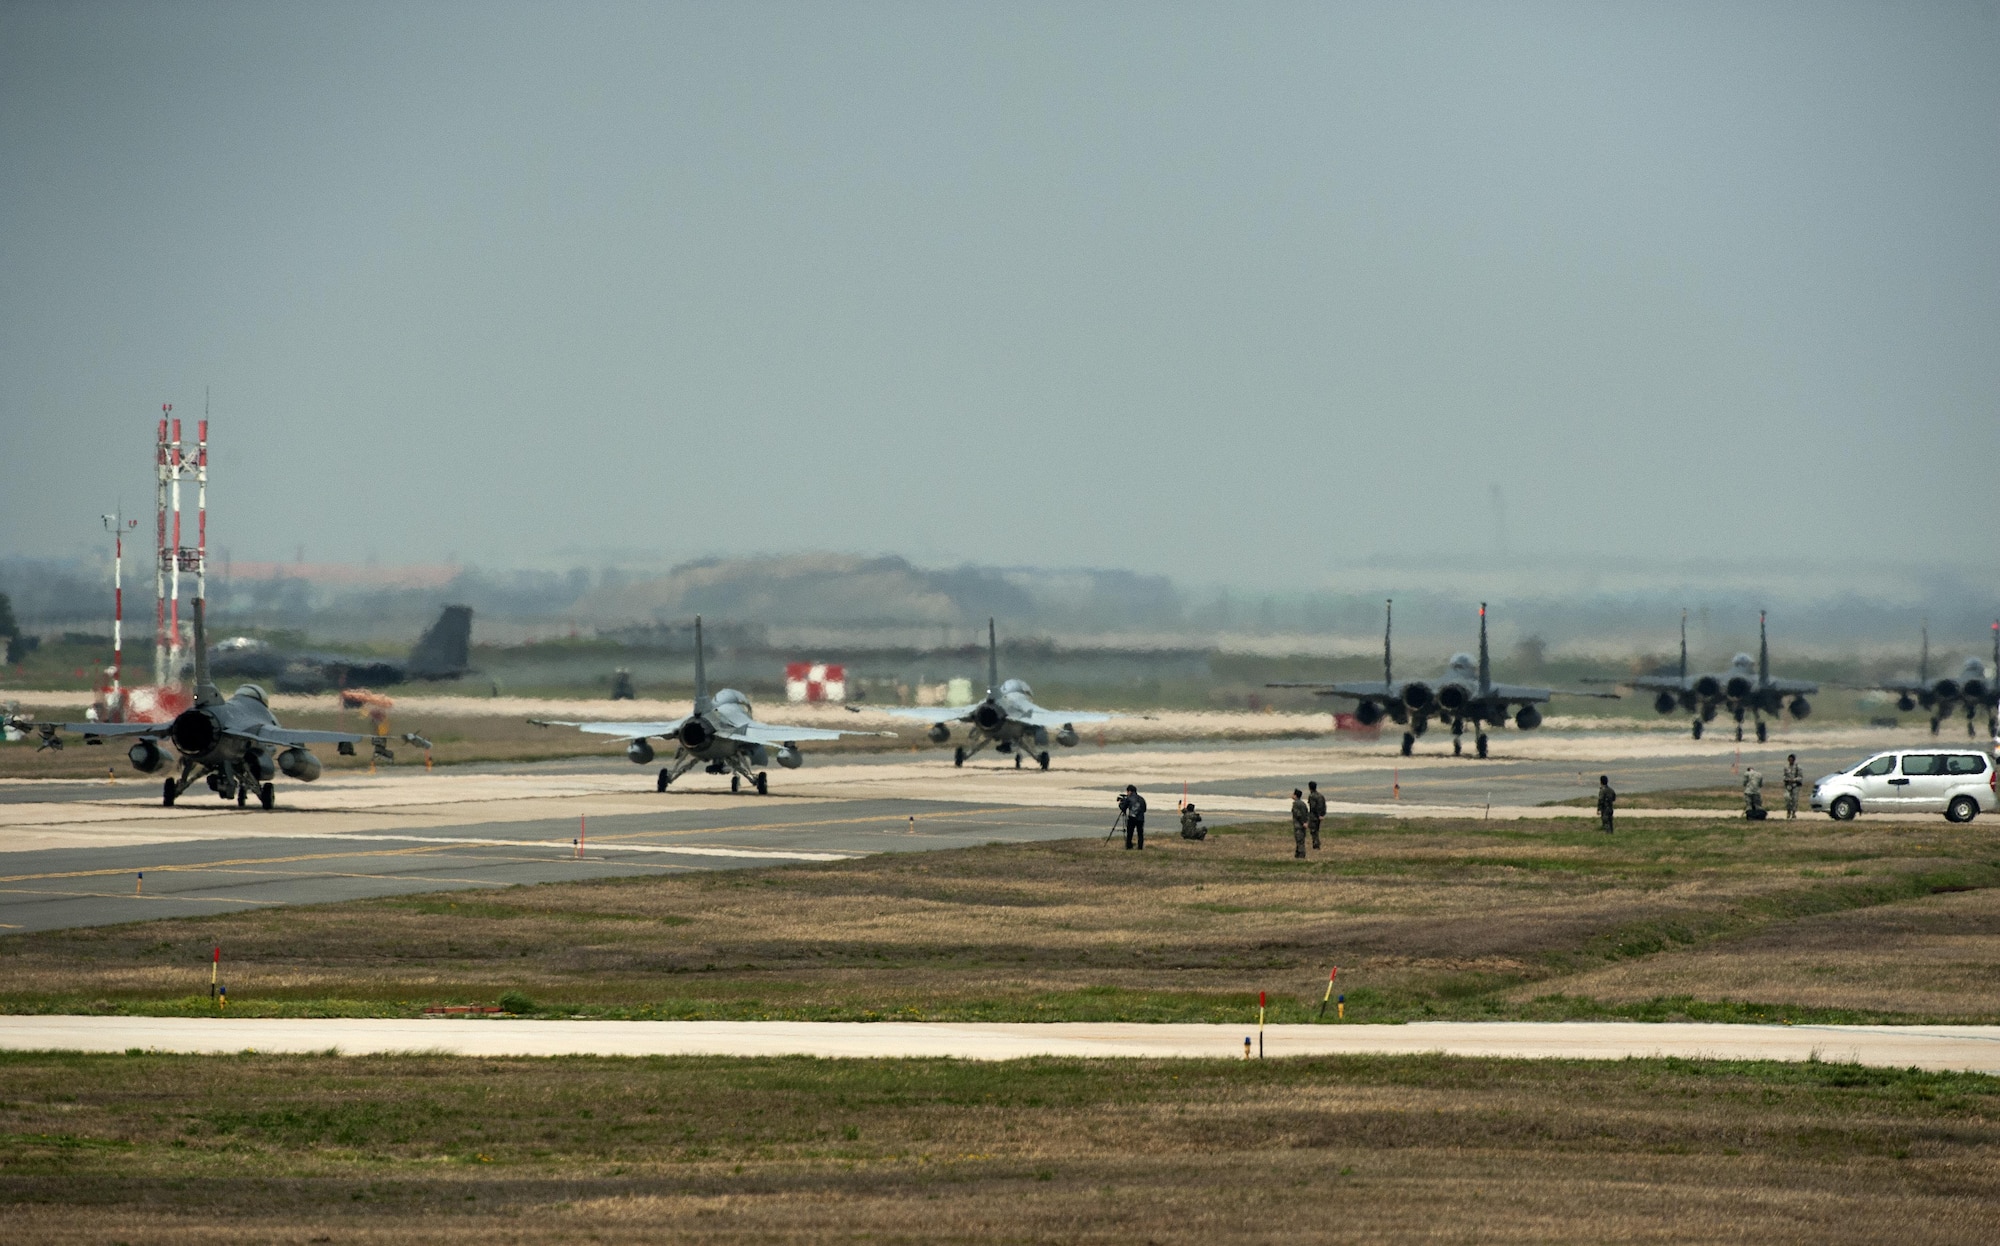 Aircraft from the 8th Fighter Wing, 19th Fighter Wing, Jungwon Air Base, Republic of Korea, and the 11th Fighter Wing, Daegu Air Base, ROK, taxi towards the runway during Max Thunder 16 at Kunsan Air Base, Republic of Korea, April 18, 2016. Exercise Max Thunder is part of a continuous exercise program to enhance interoperability between U.S. and ROK forces. (U.S. Air Force photo by Staff Sgt. Nick Wilson/Released)